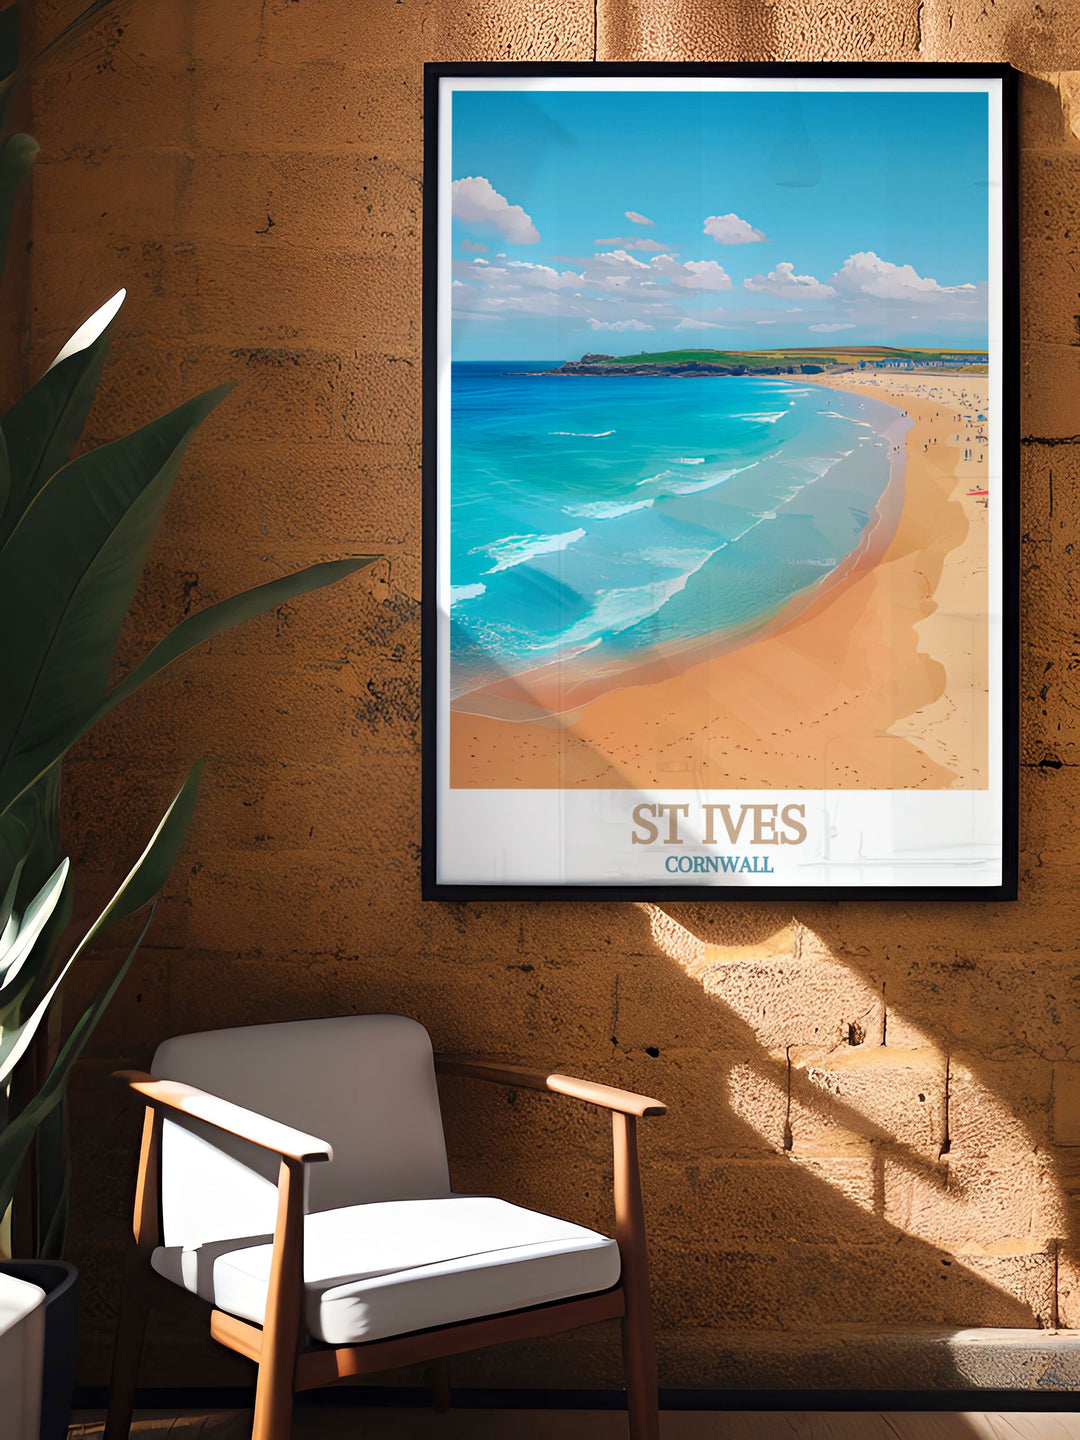 This travel poster highlights the serene beauty of Porthmeor Beach and the artistic splendor of St Ives, showcasing the natural wonders and vibrant culture of Cornwall.